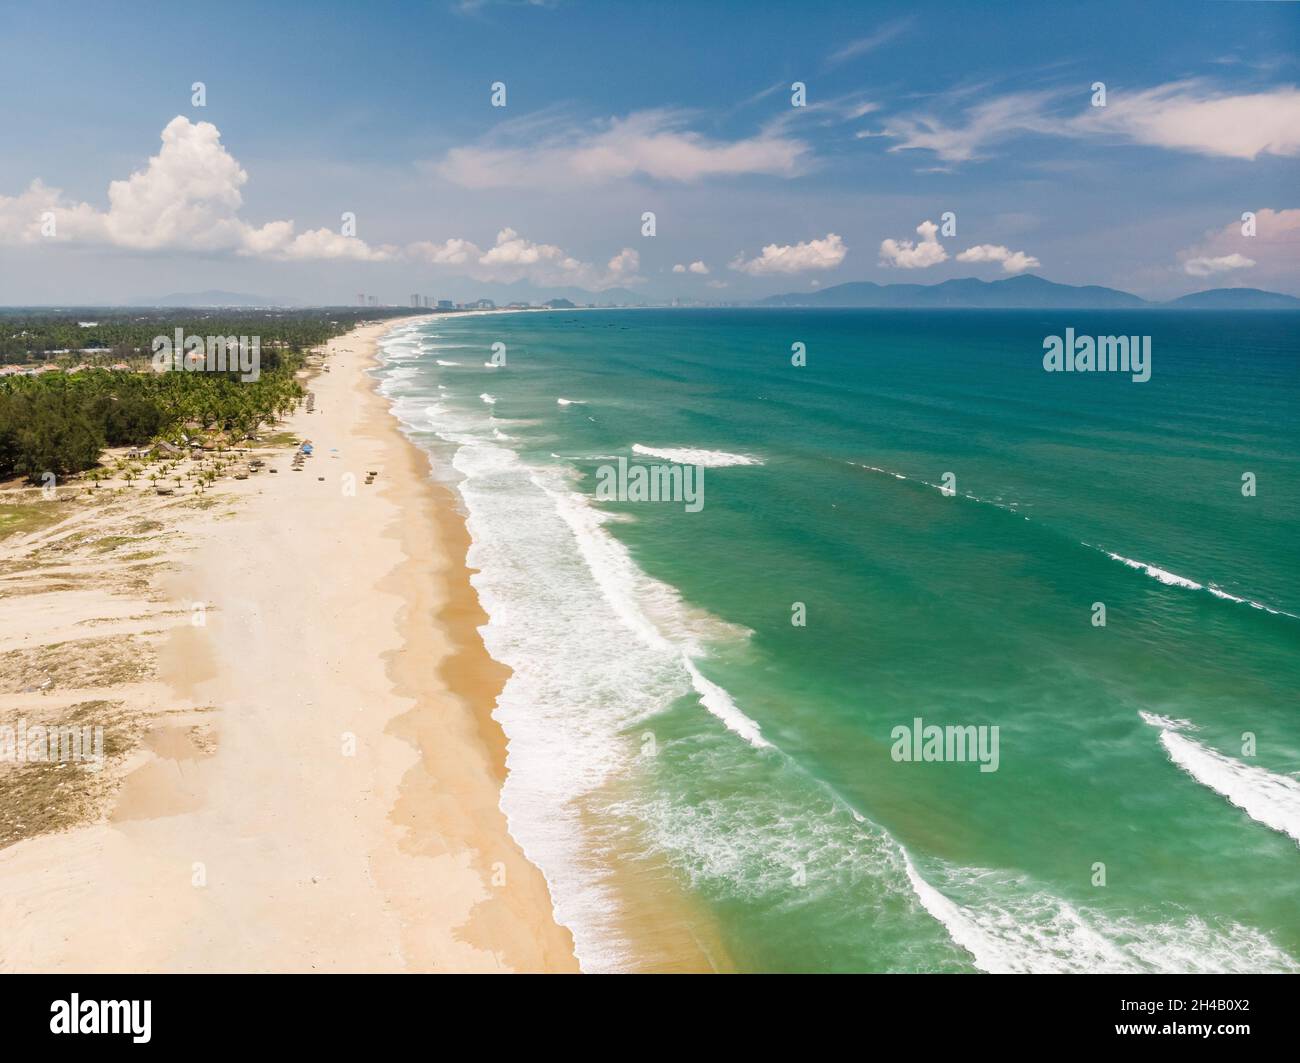 Aerial view of beautiful vietnamese landscape, beach by emerald South China Sea near Hoi An under blue cloudy sky, and distant city Da Nang, Vietnam Stock Photo